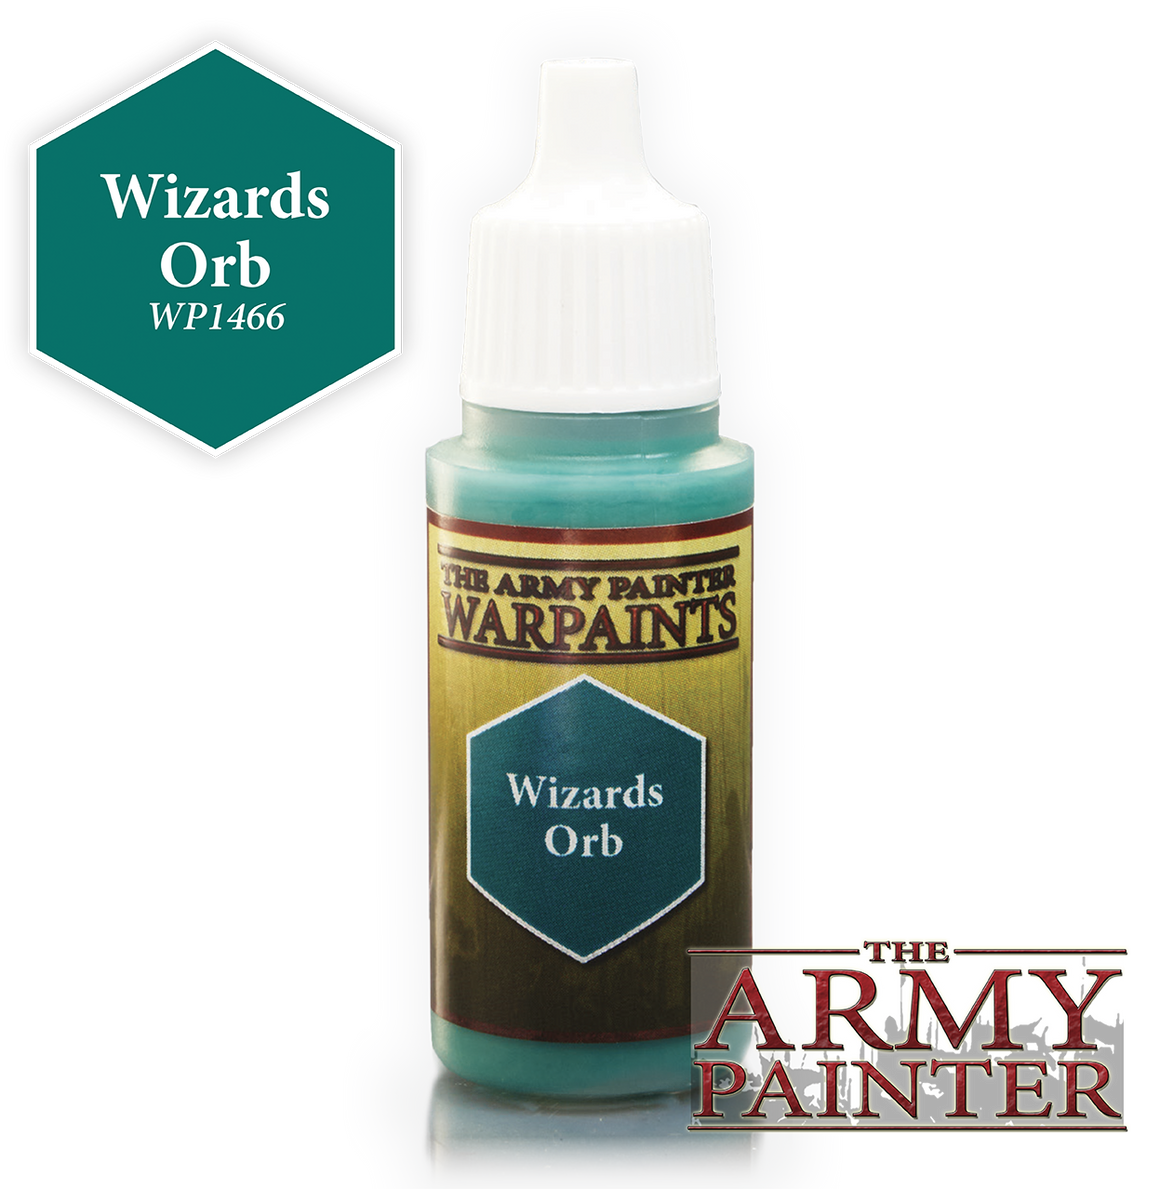 Army Painter Acrylic Warpaint - Wizards Orb